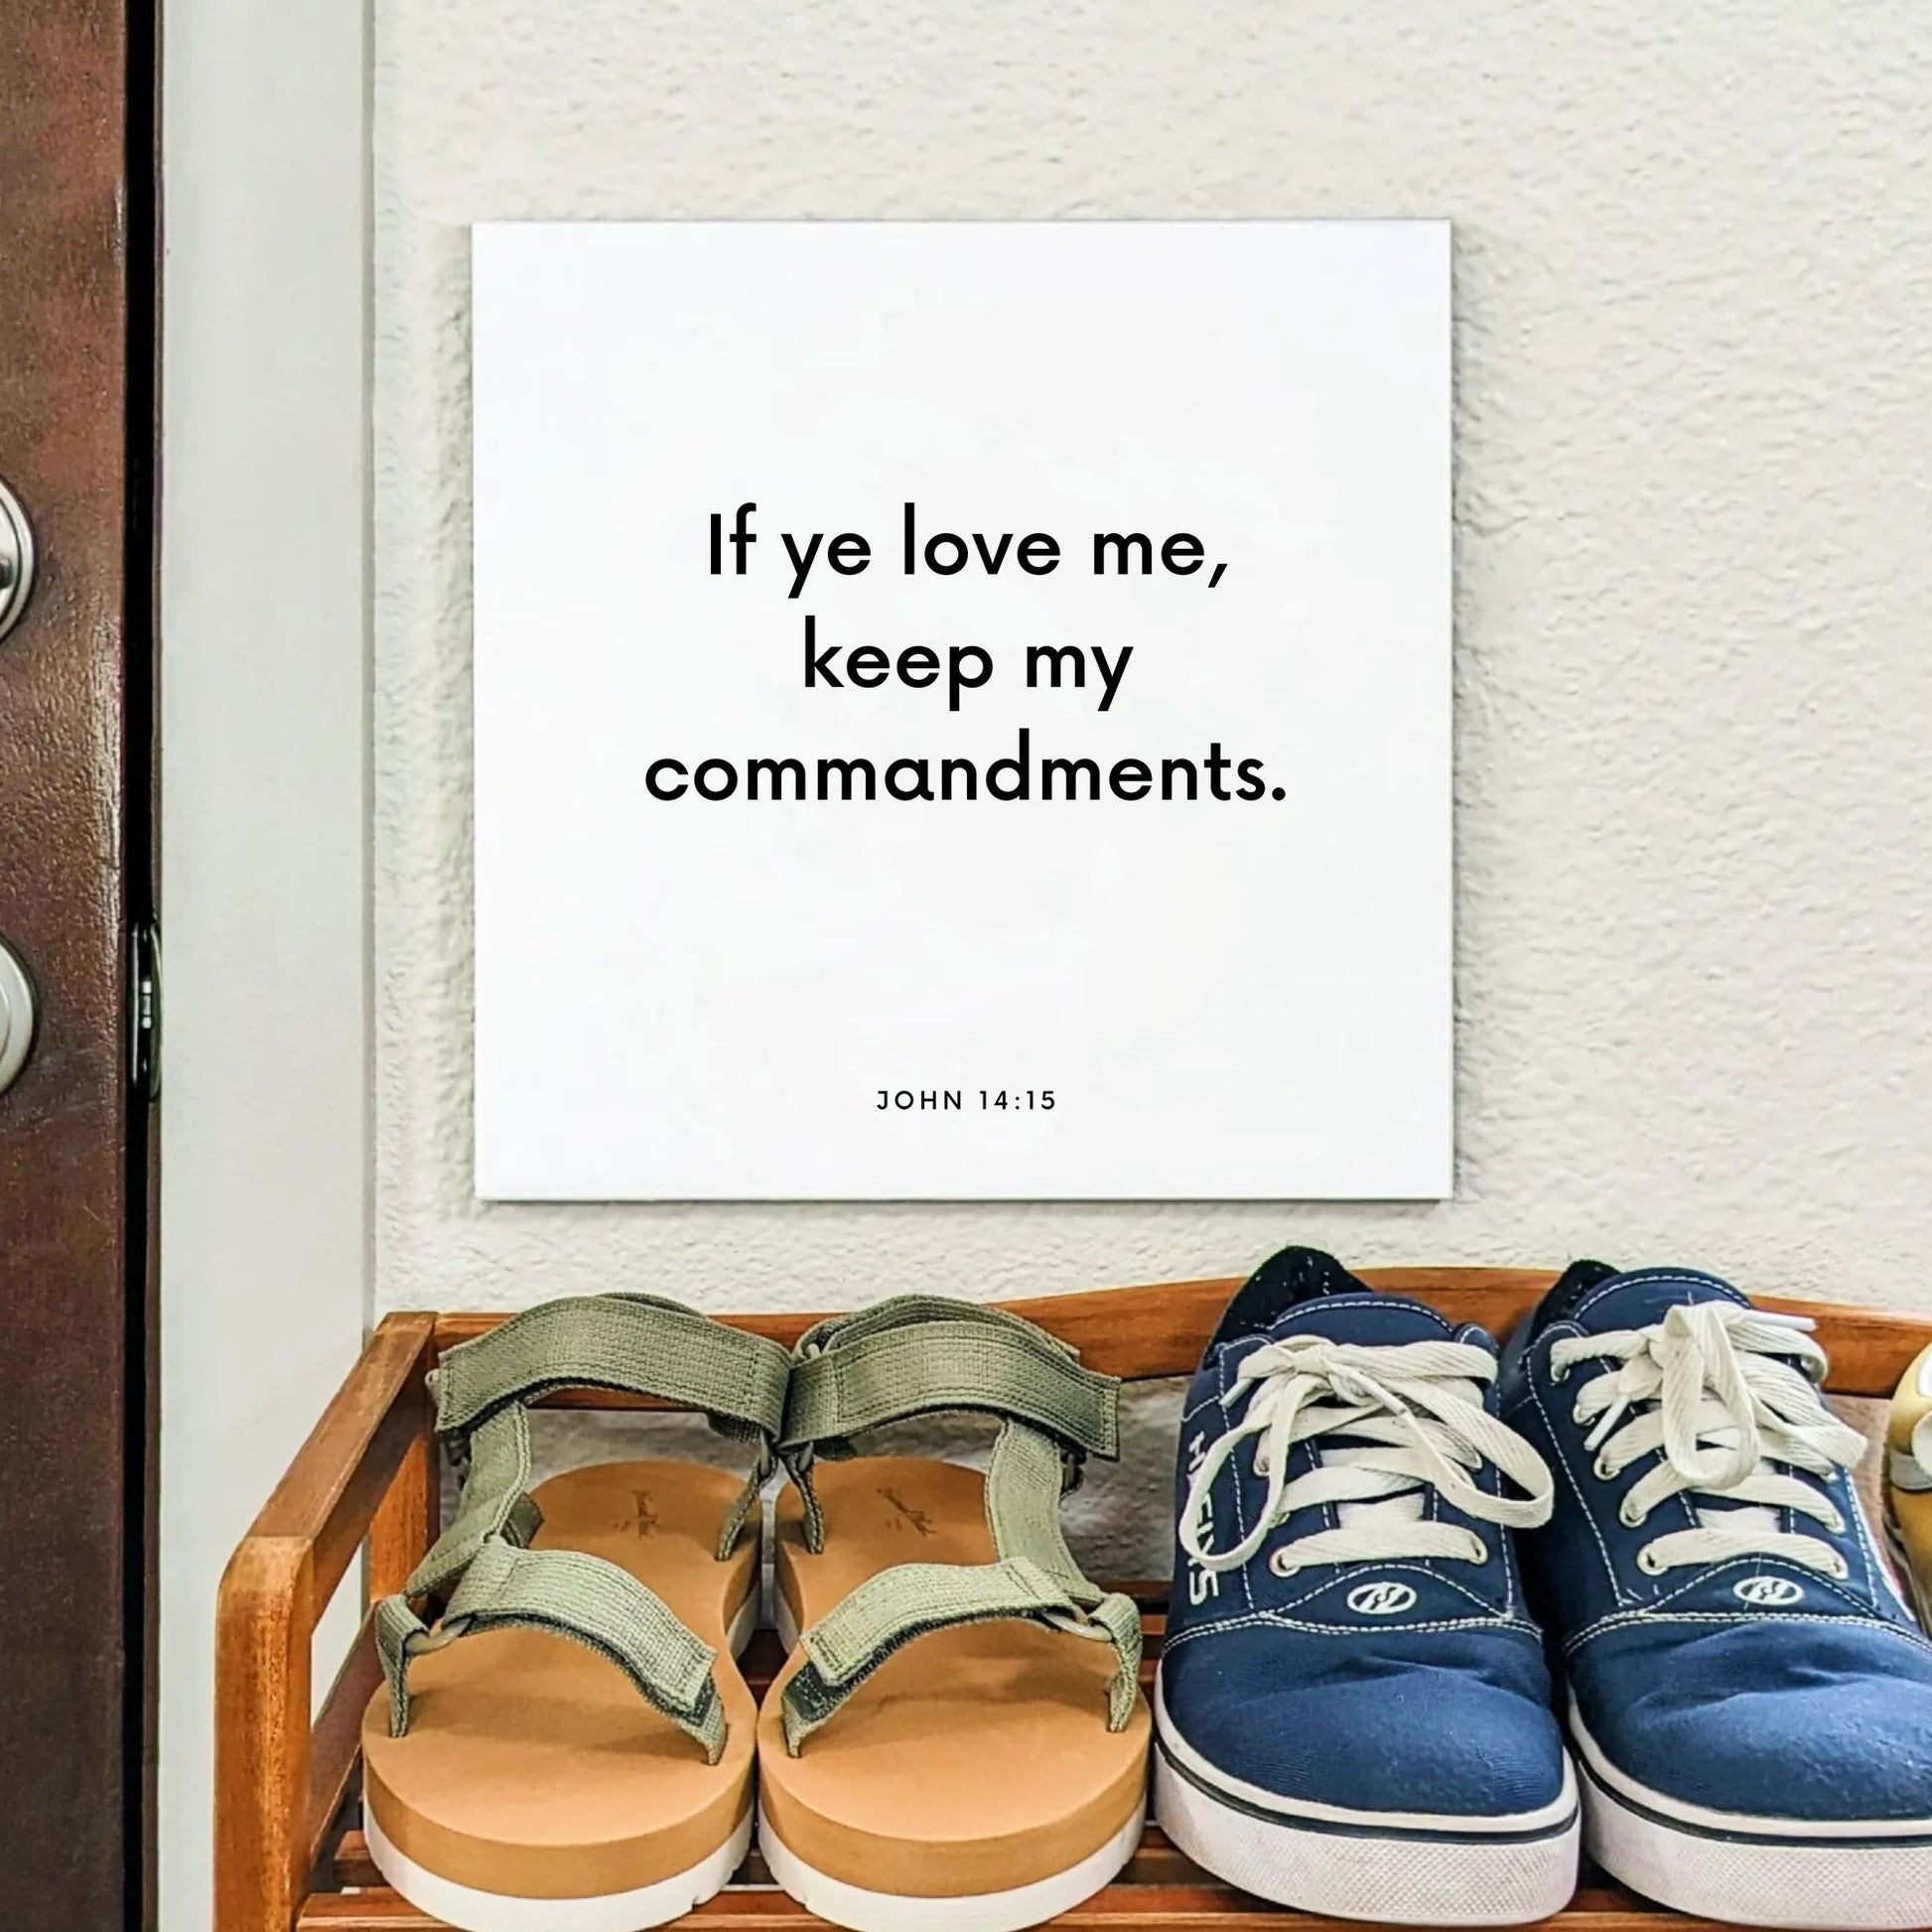 Shoes mouting of the scripture tile for John 14:15 - "If ye love me, keep my commandments"